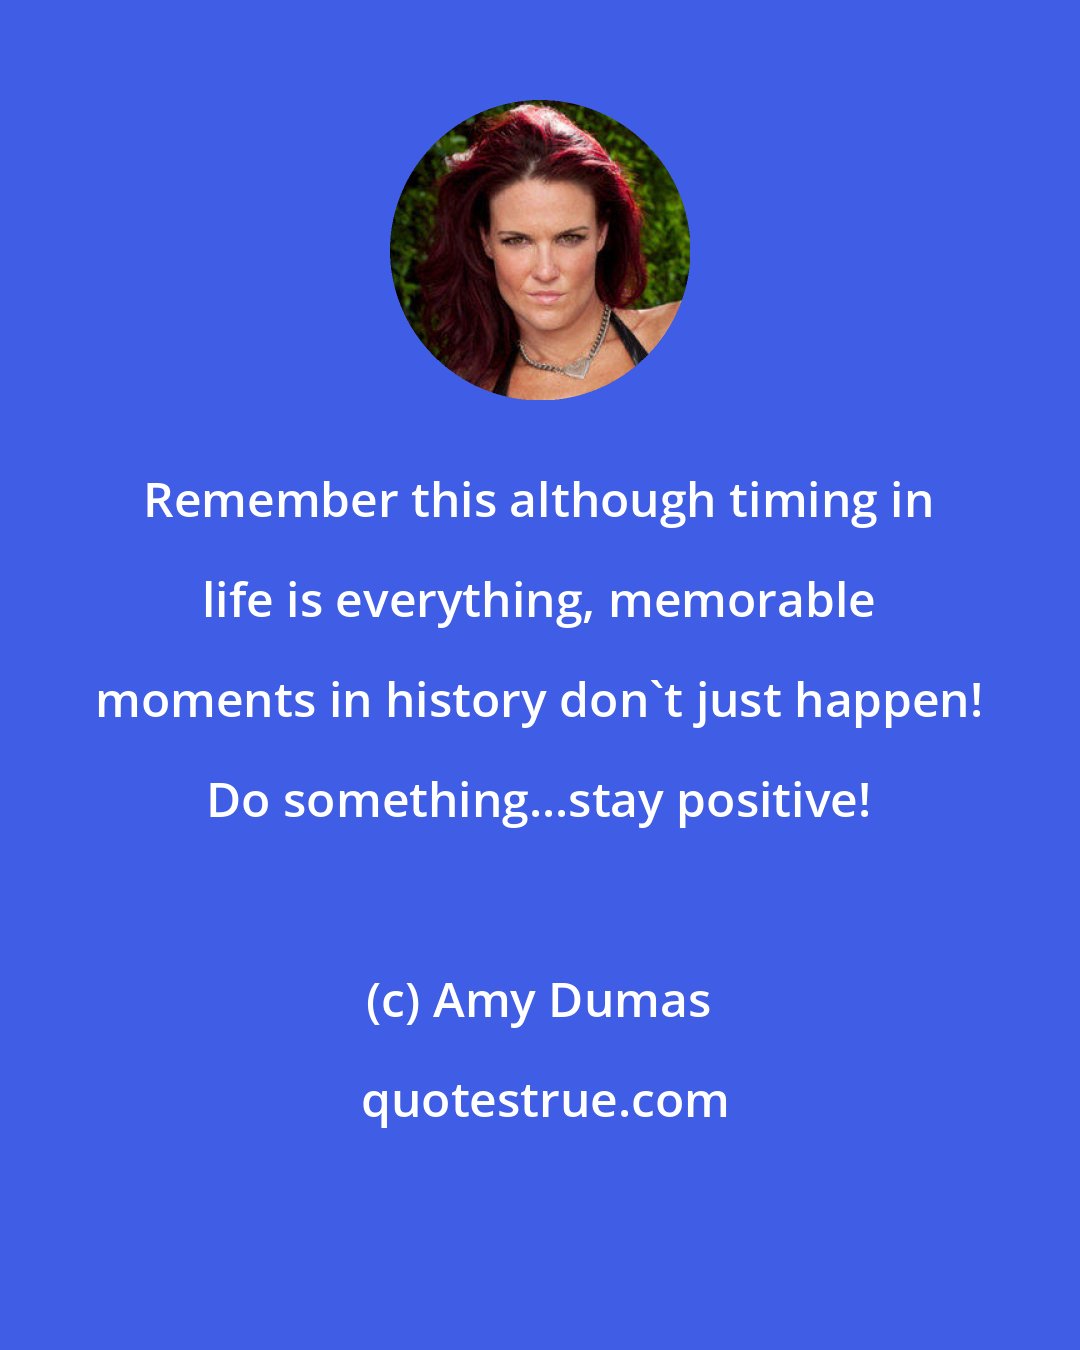 Amy Dumas: Remember this although timing in life is everything, memorable moments in history don't just happen! Do something...stay positive!